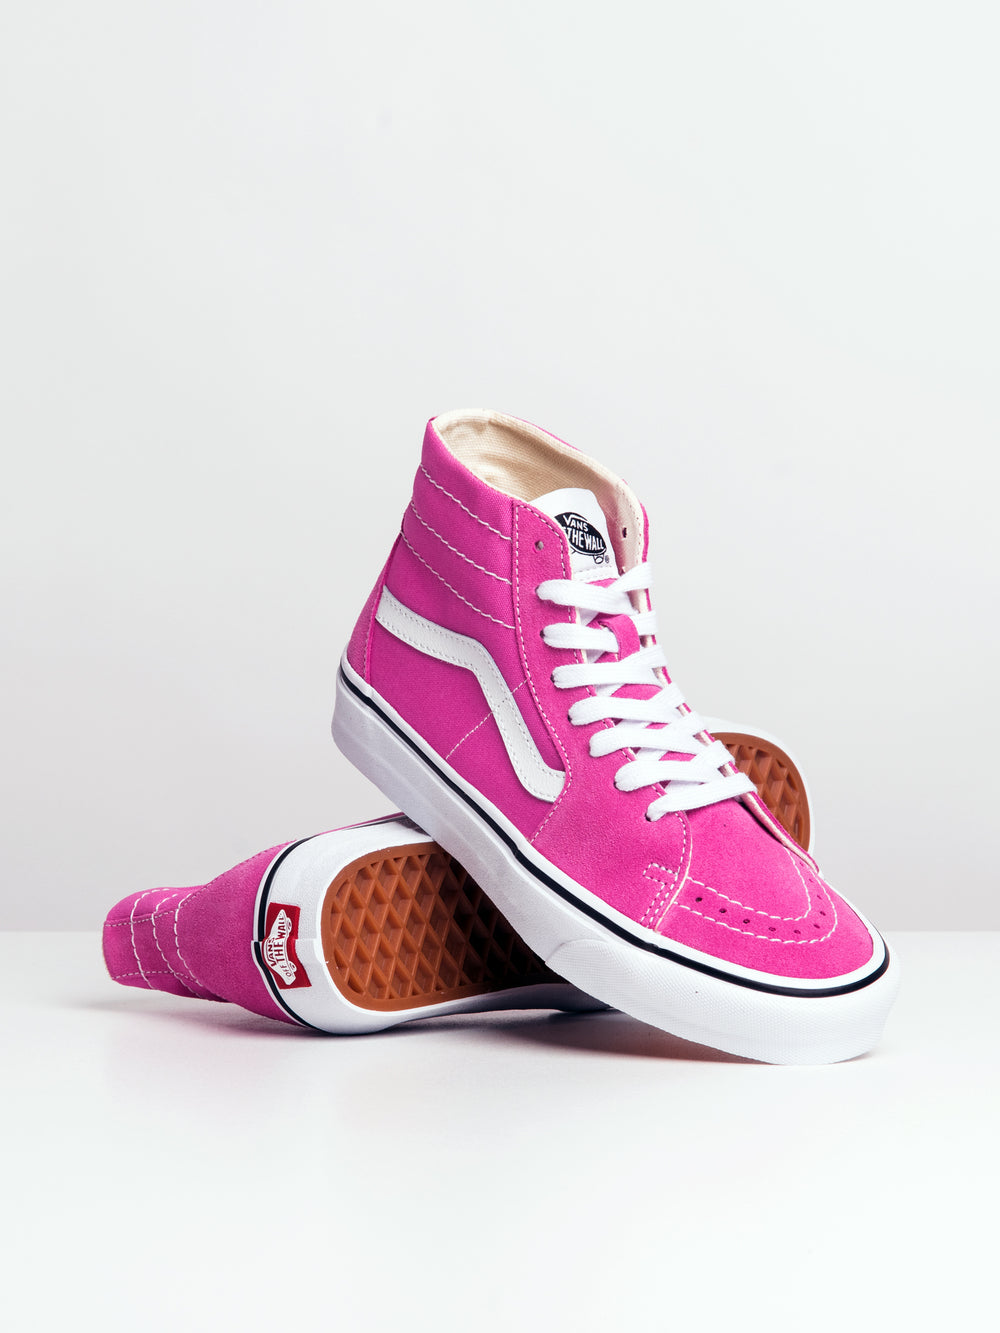 WOMENS VANS SK8 HI TAPERED - CLEARANCE